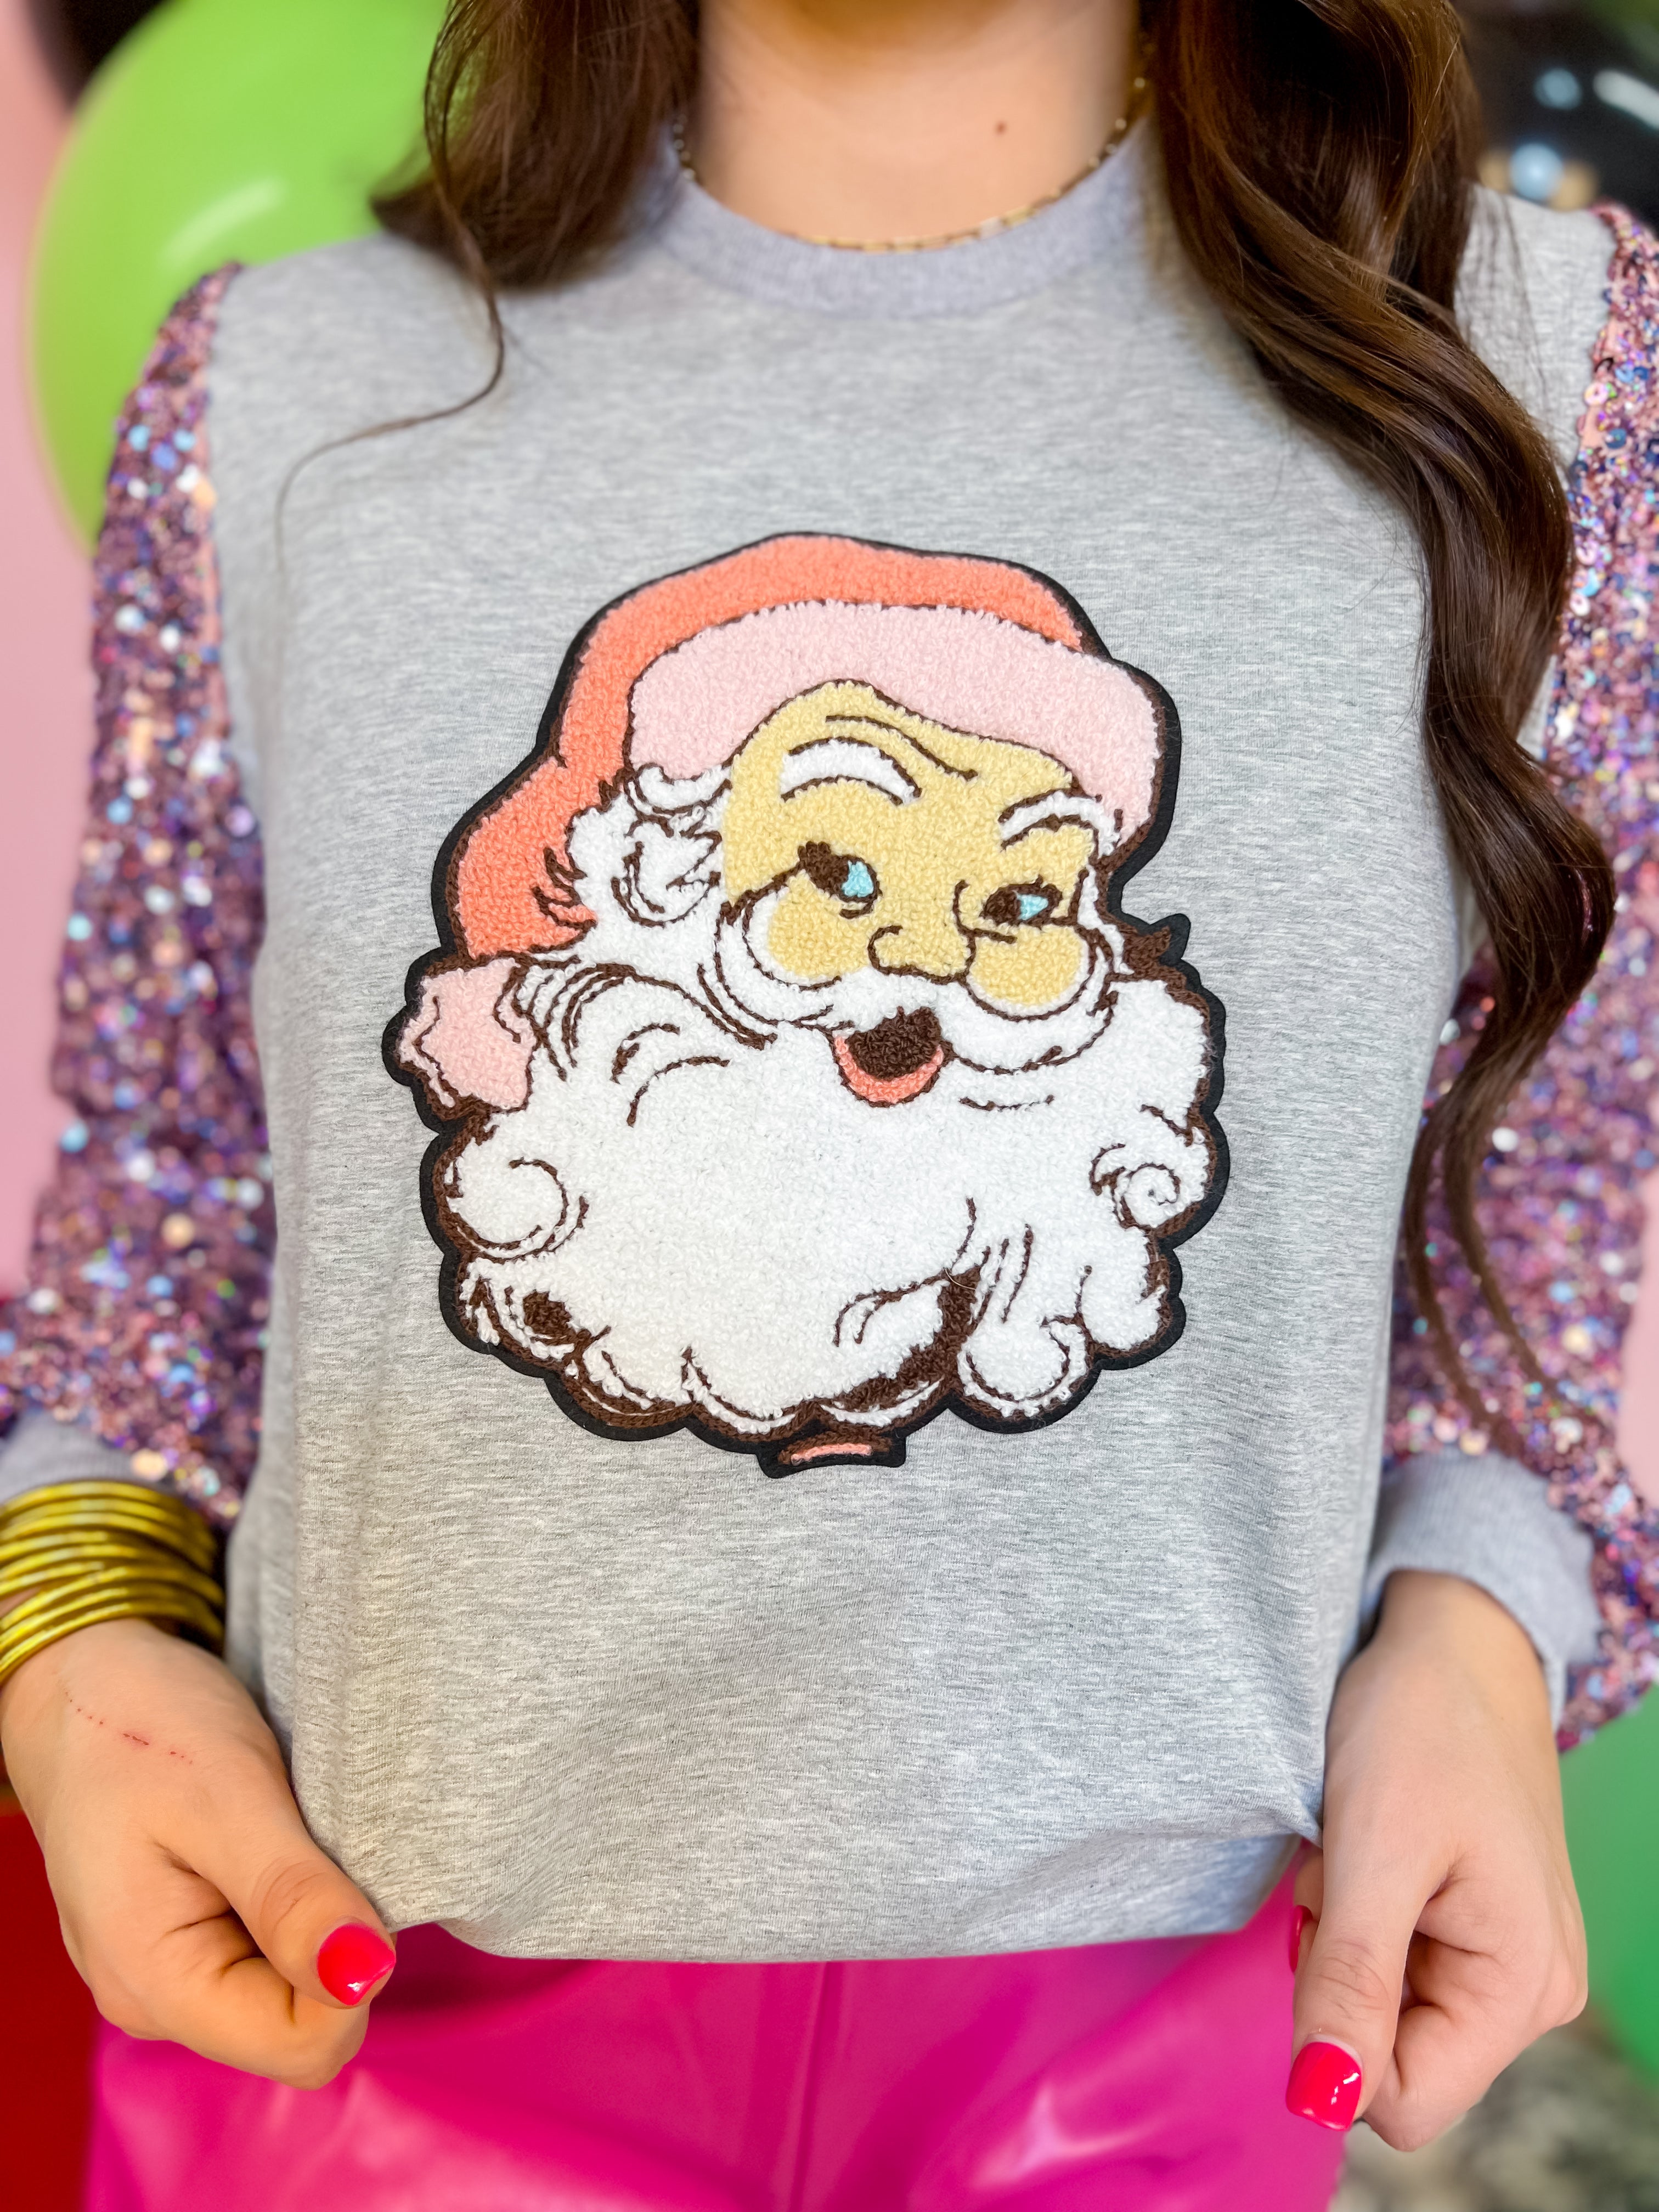 [Layerz] Shimmer Clause Sweater